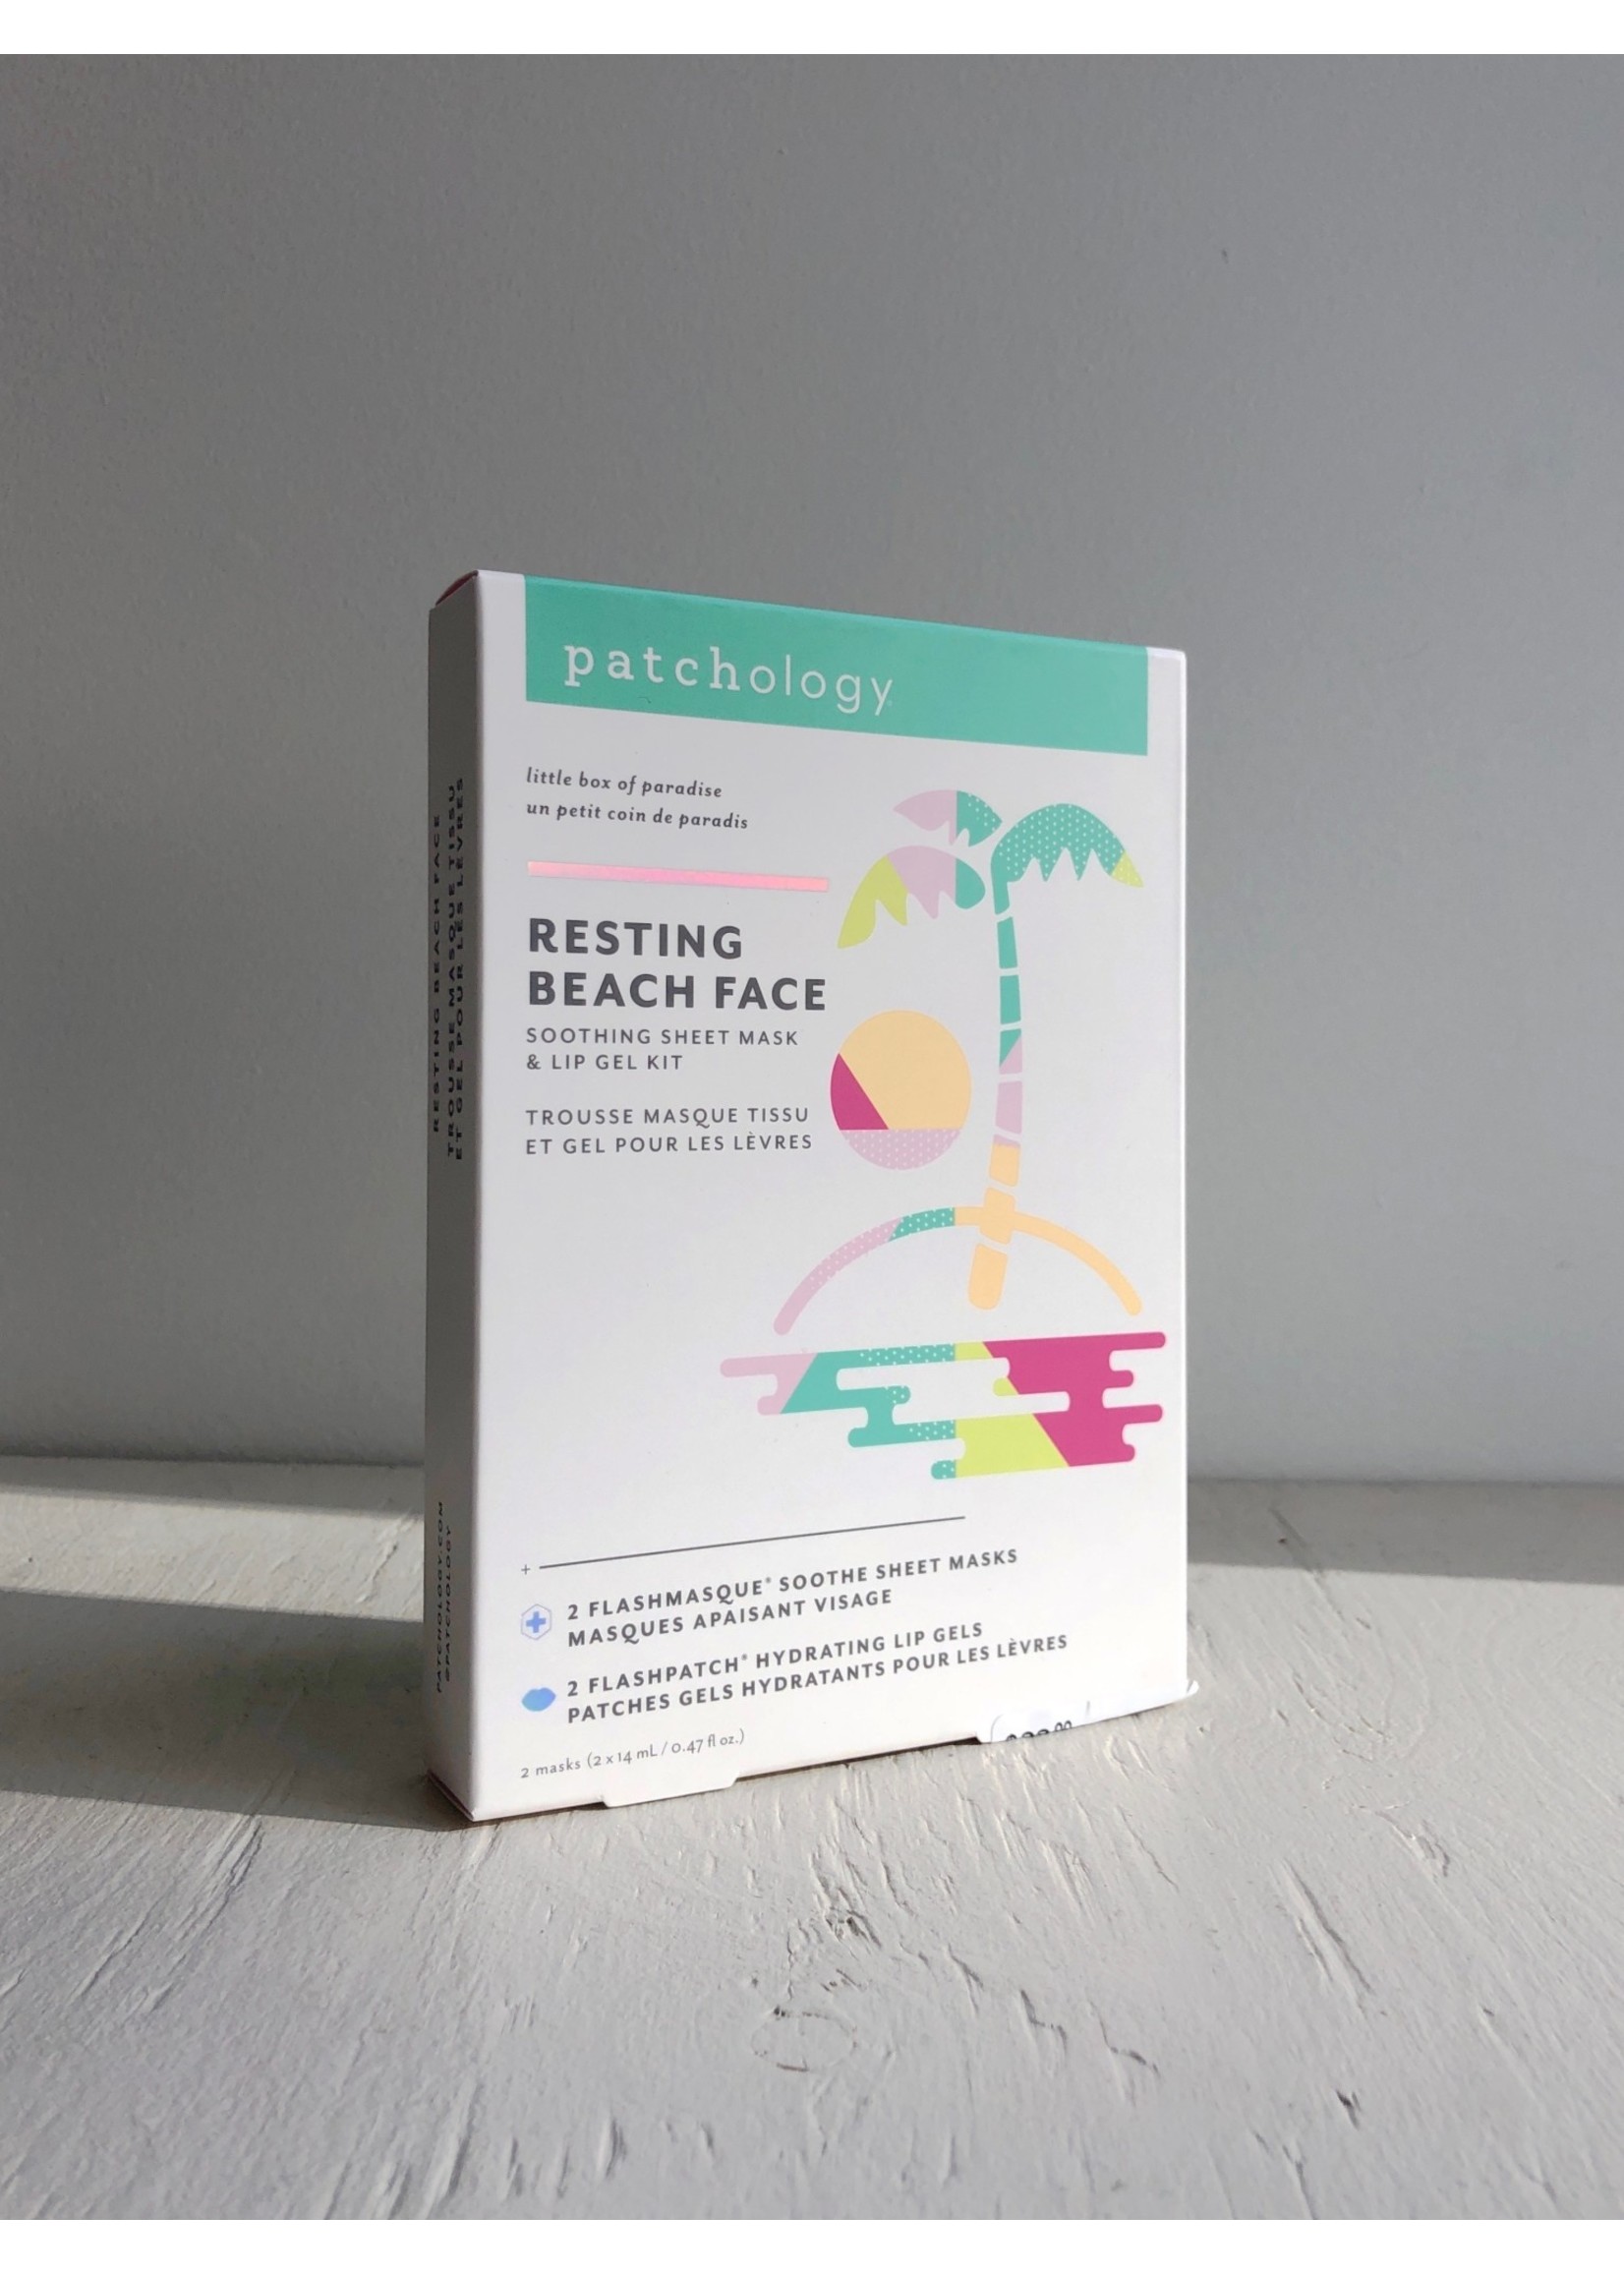 Patchology "Resting Beach Face" Mask and Gels Pack by Patchology